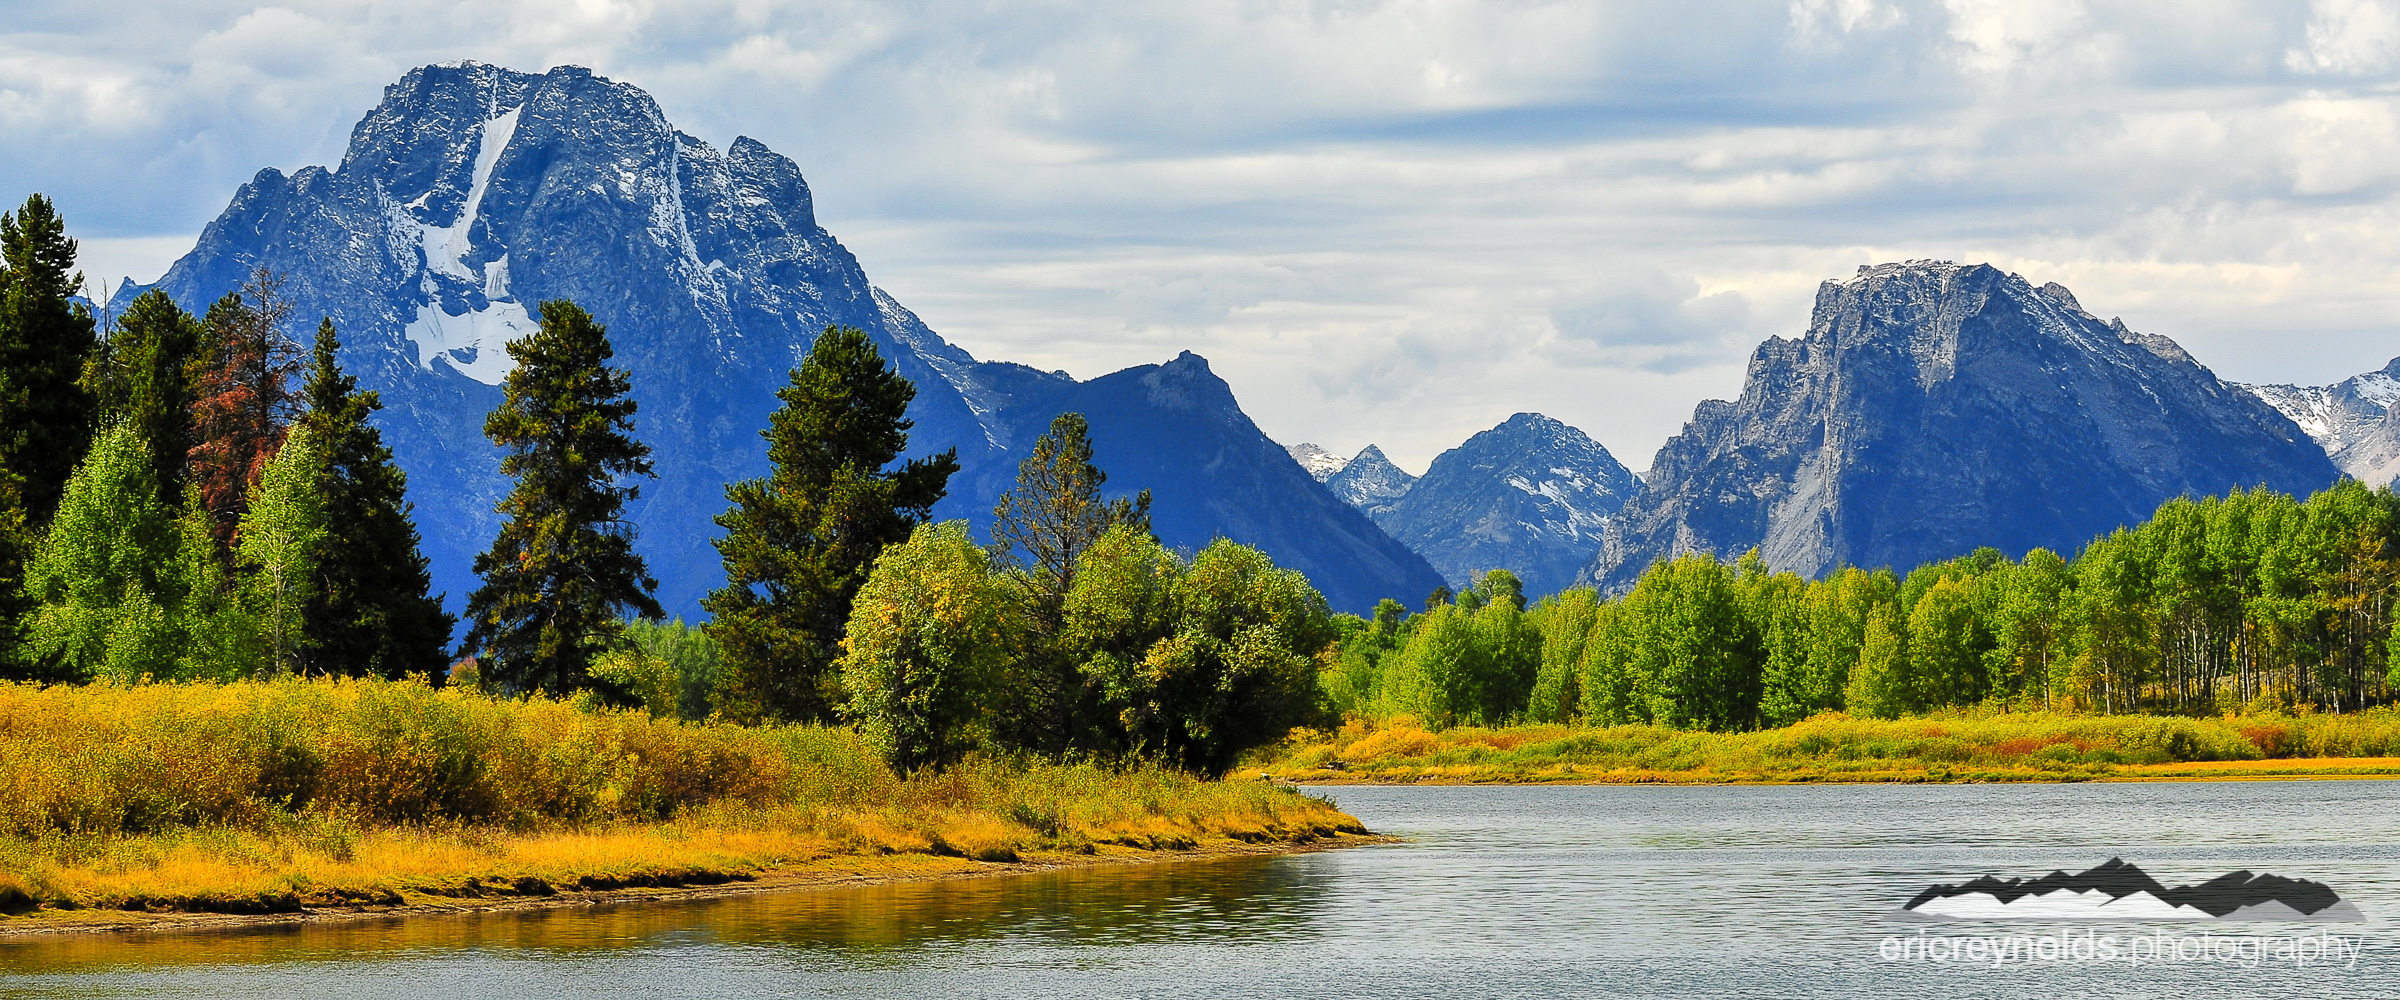 Mt. Moran from Oxbow Bend by Eric Reynolds - Landscape Photographer